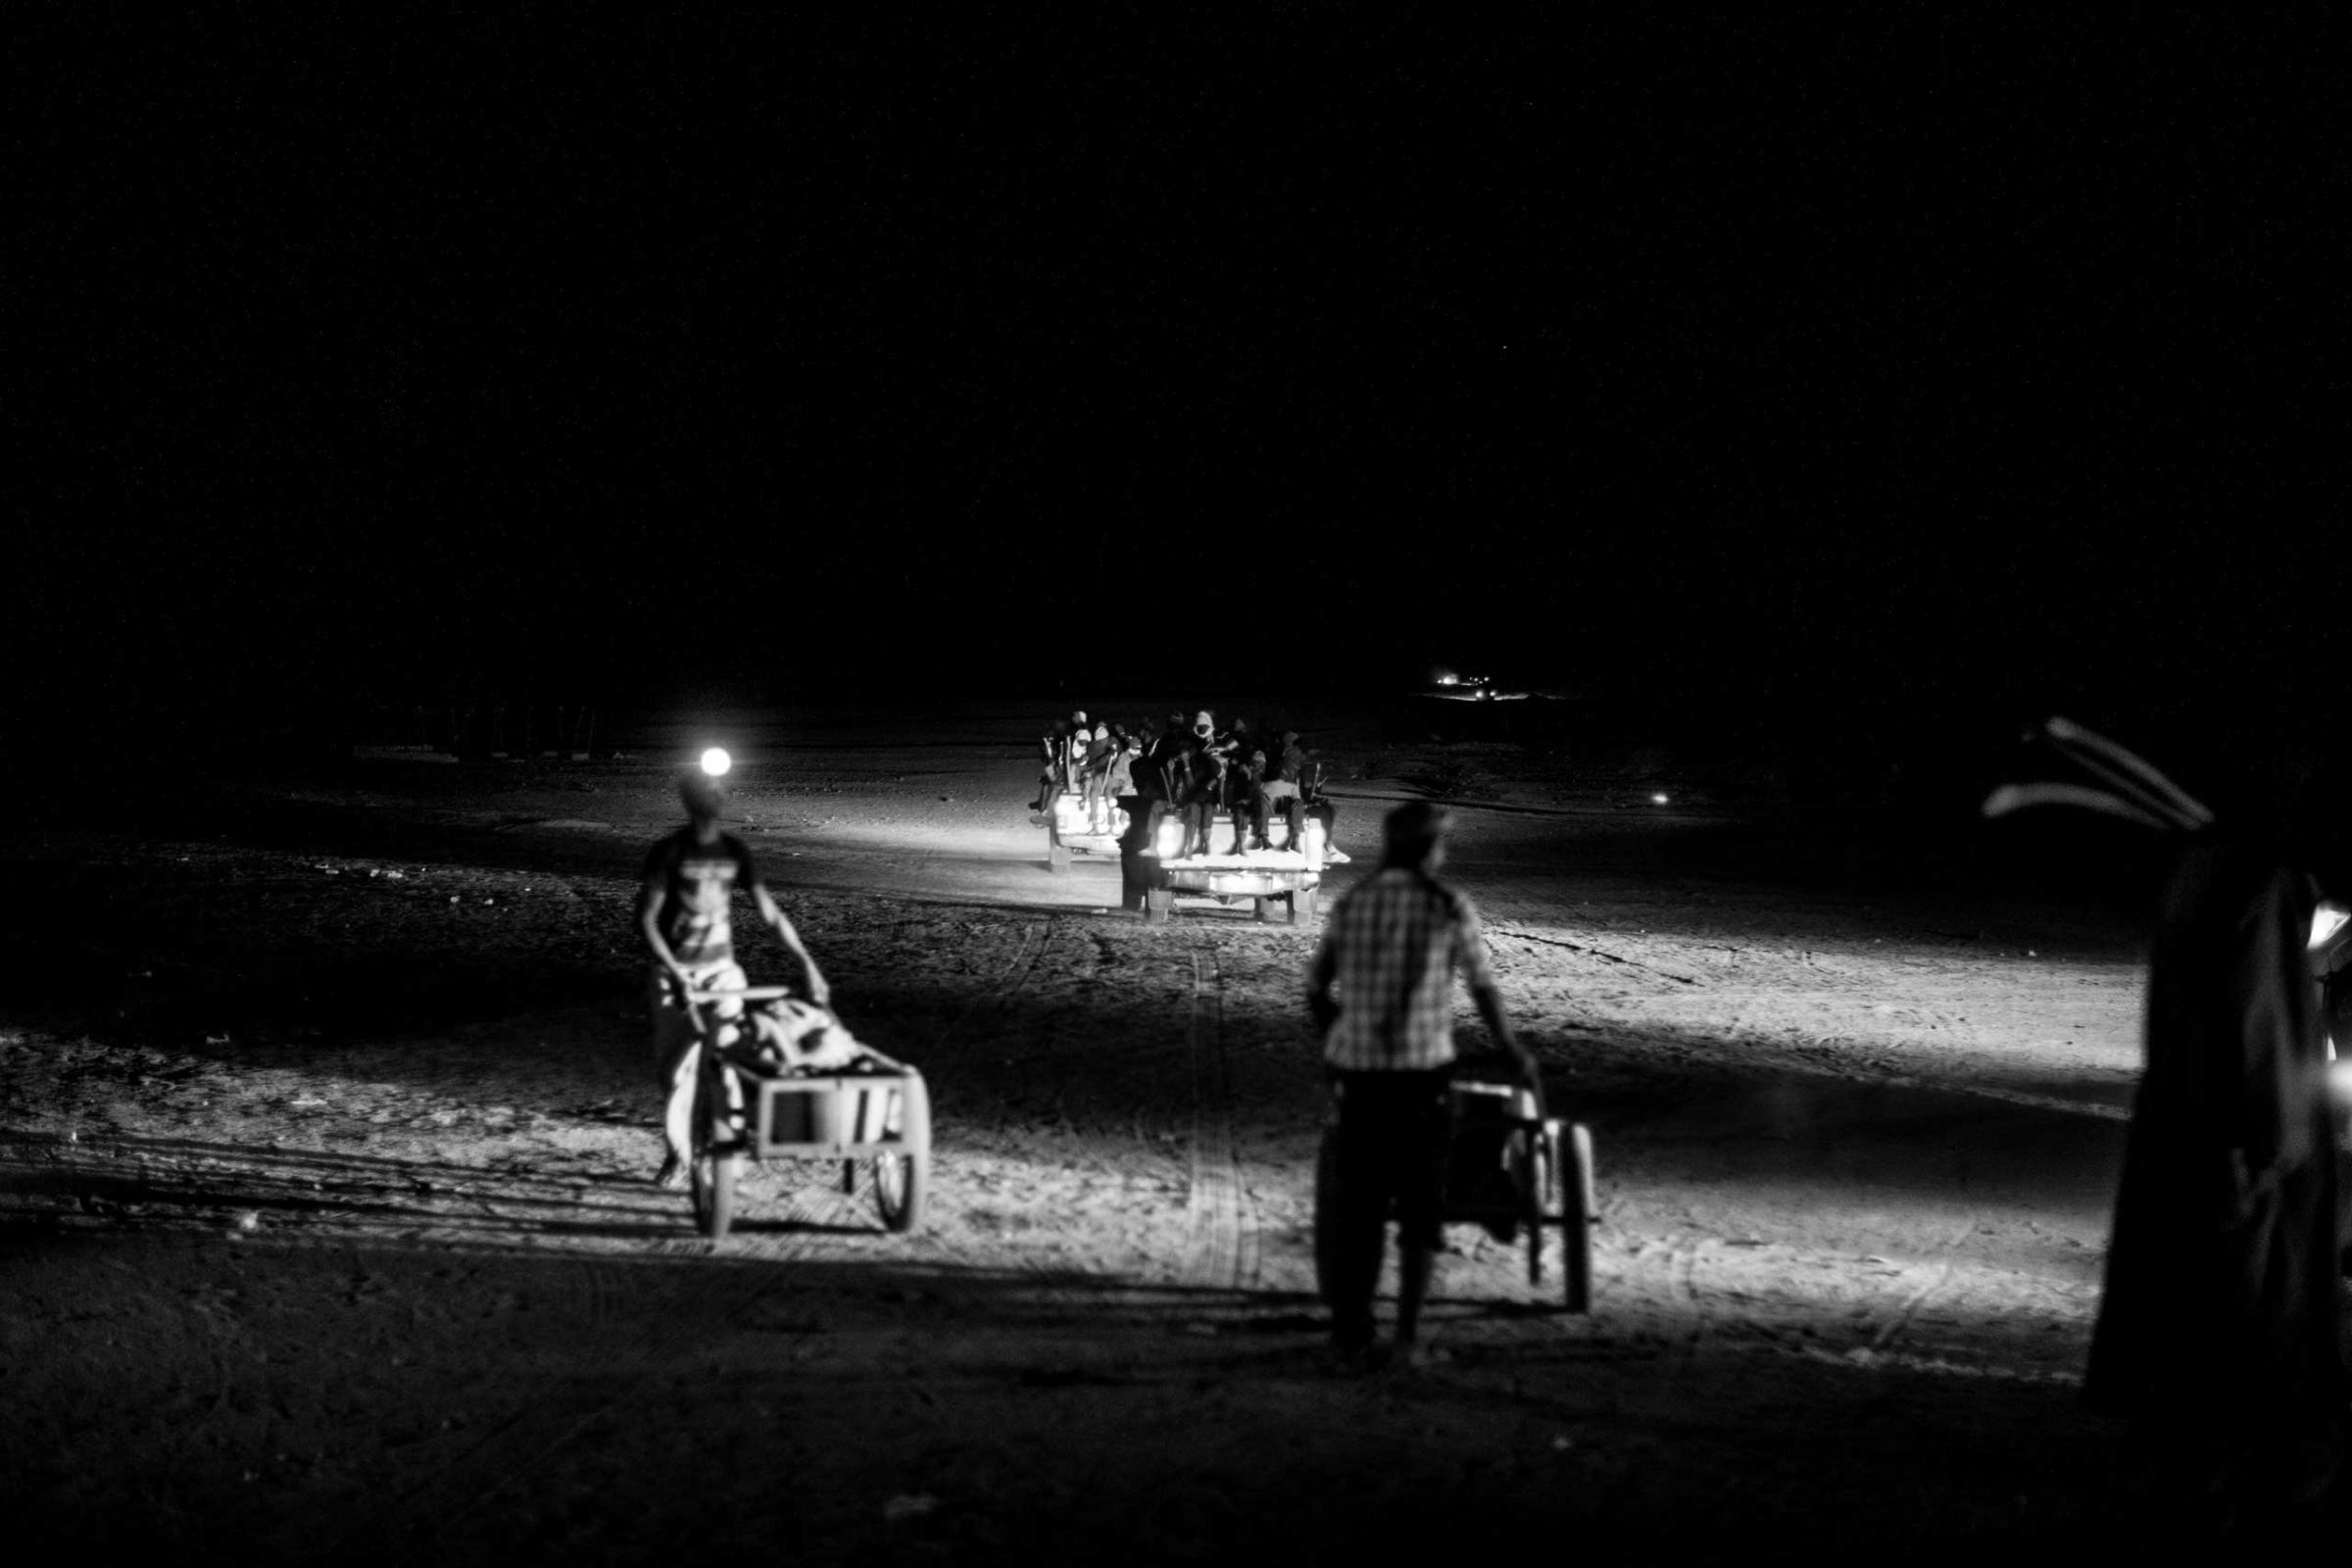 Trucks carrying migrants pass back into the desert as vendors push their carts back to wait for more trucks at a small desert outpost a few hours north of Agadez. Smugglers time their departure into the desert to within a few hours, forming a loose caravan in the hopes that it will provide some shred of security against the increasingly lawless Sahara